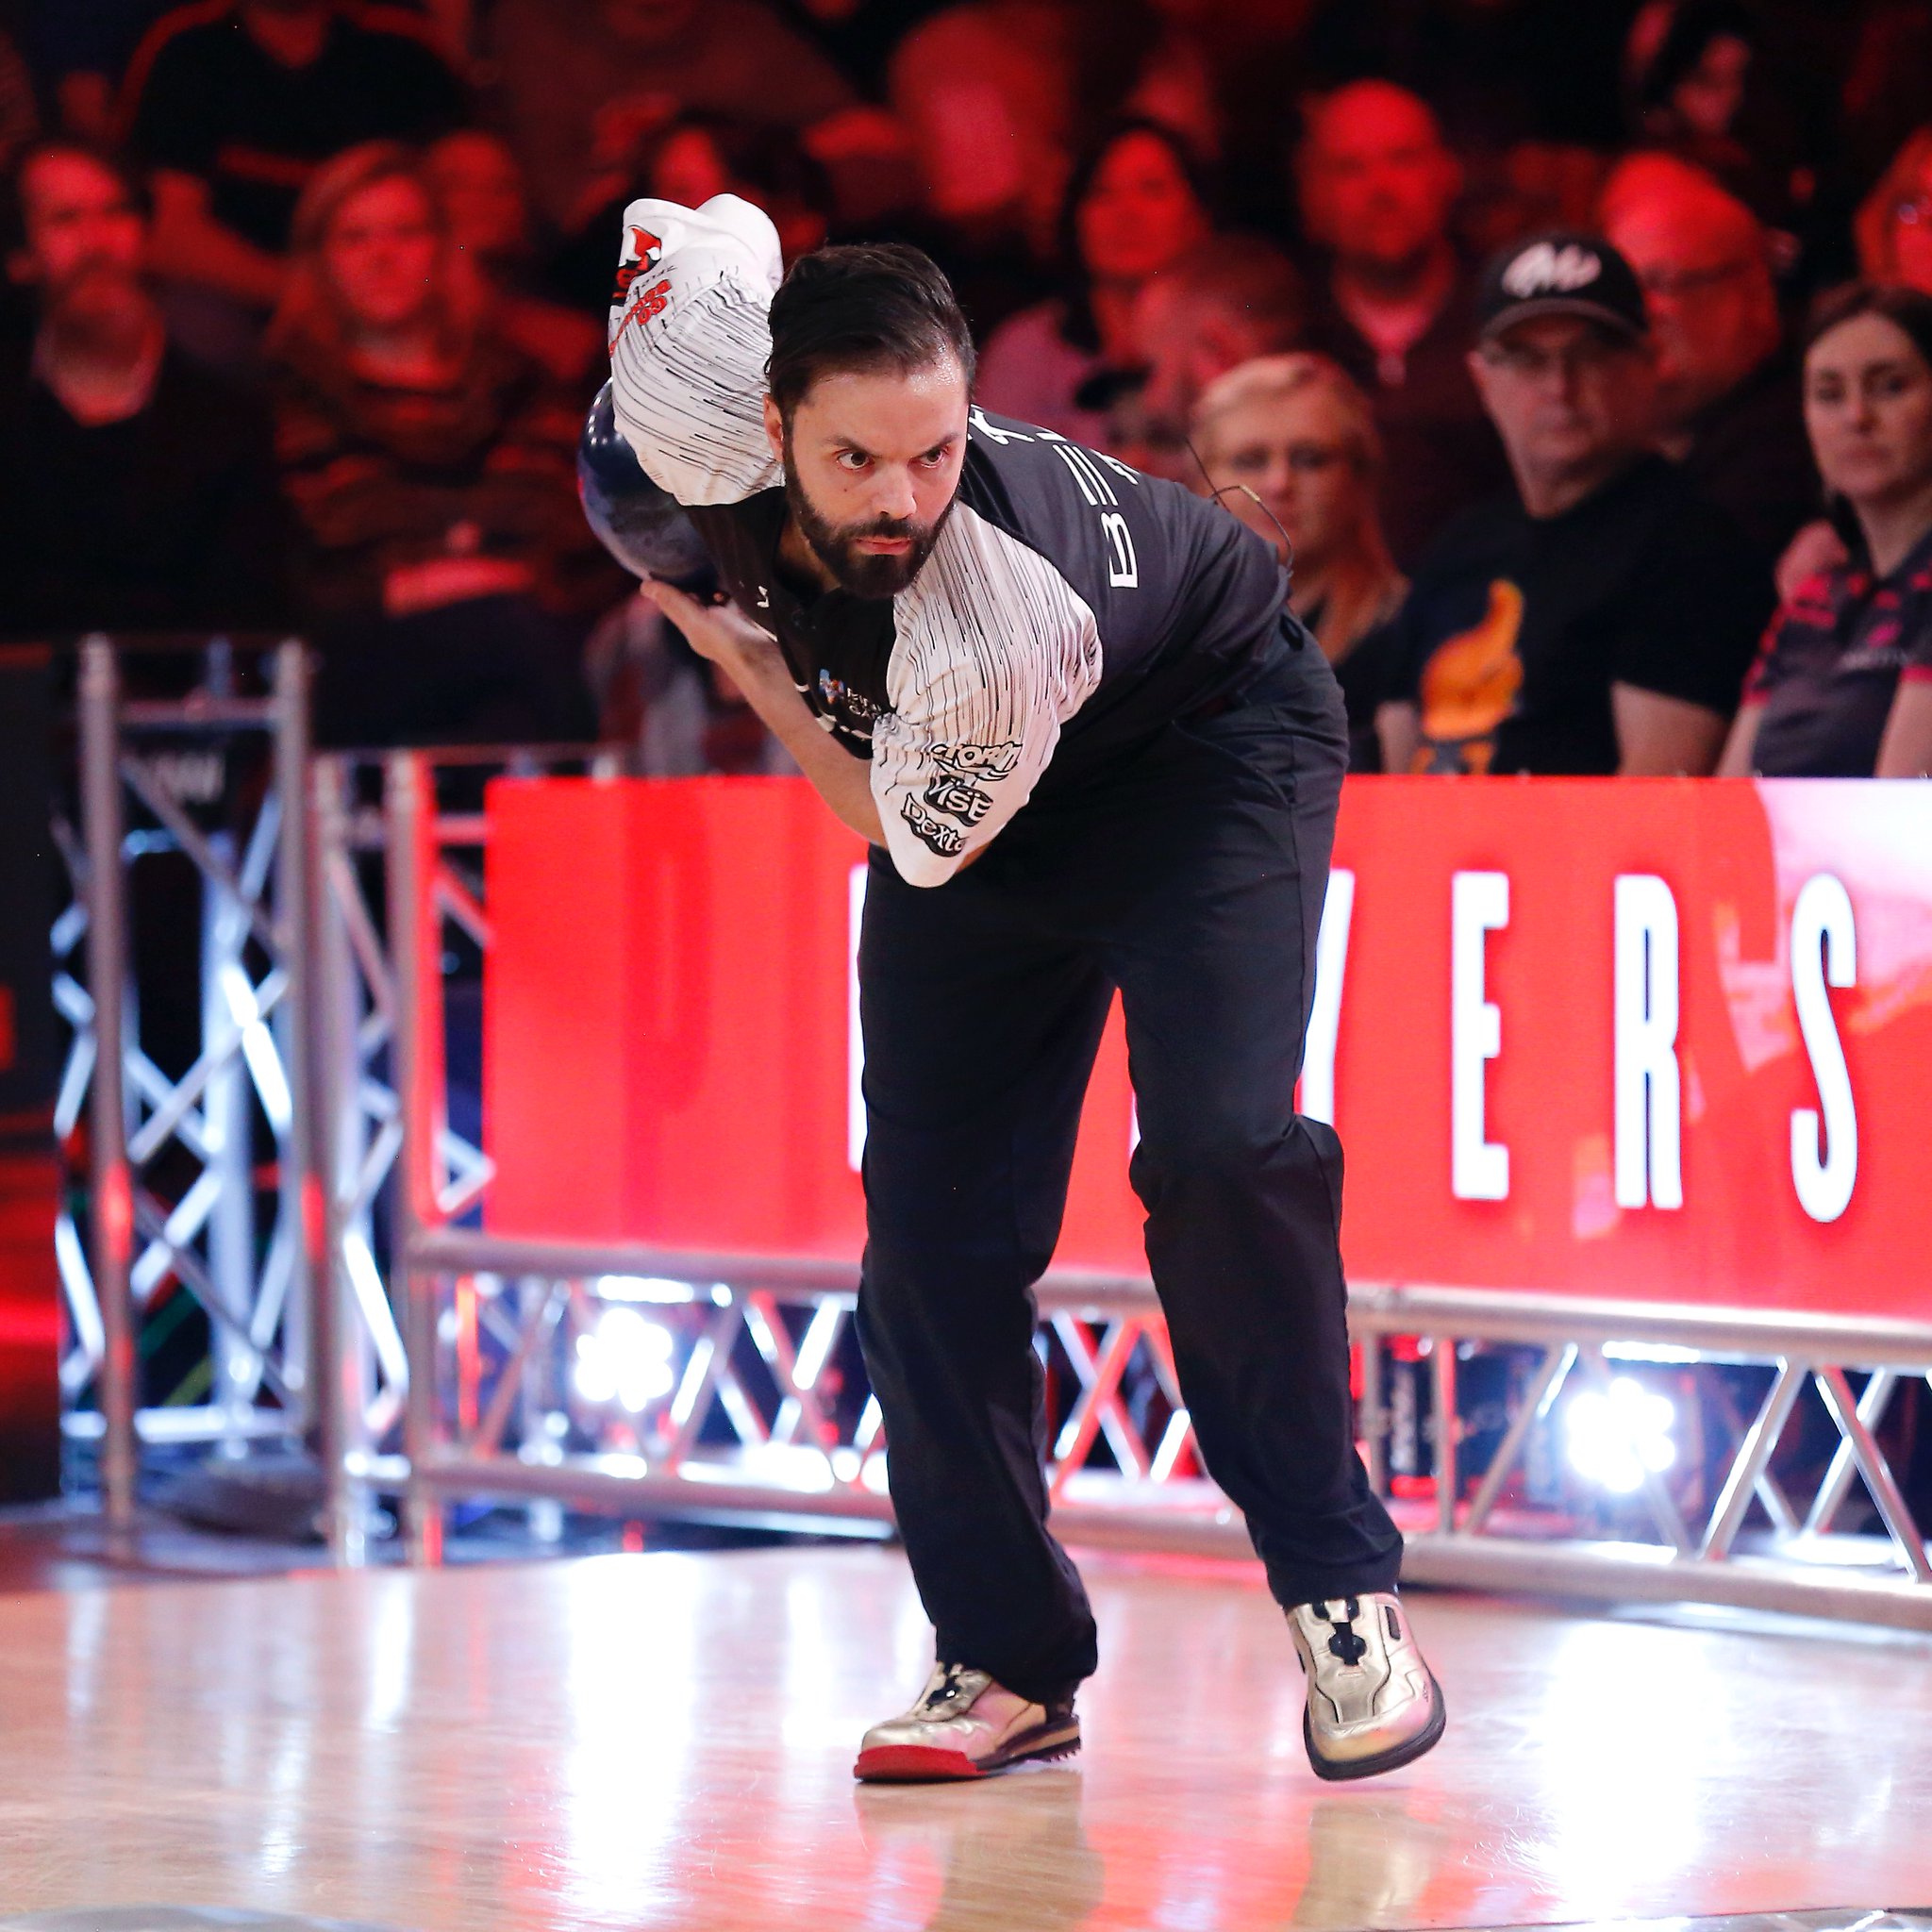 Join us in wishing 25-time PBA Tour titlist and 6-time Player of the Year, Jason Belmonte a happy 38th birthday! 